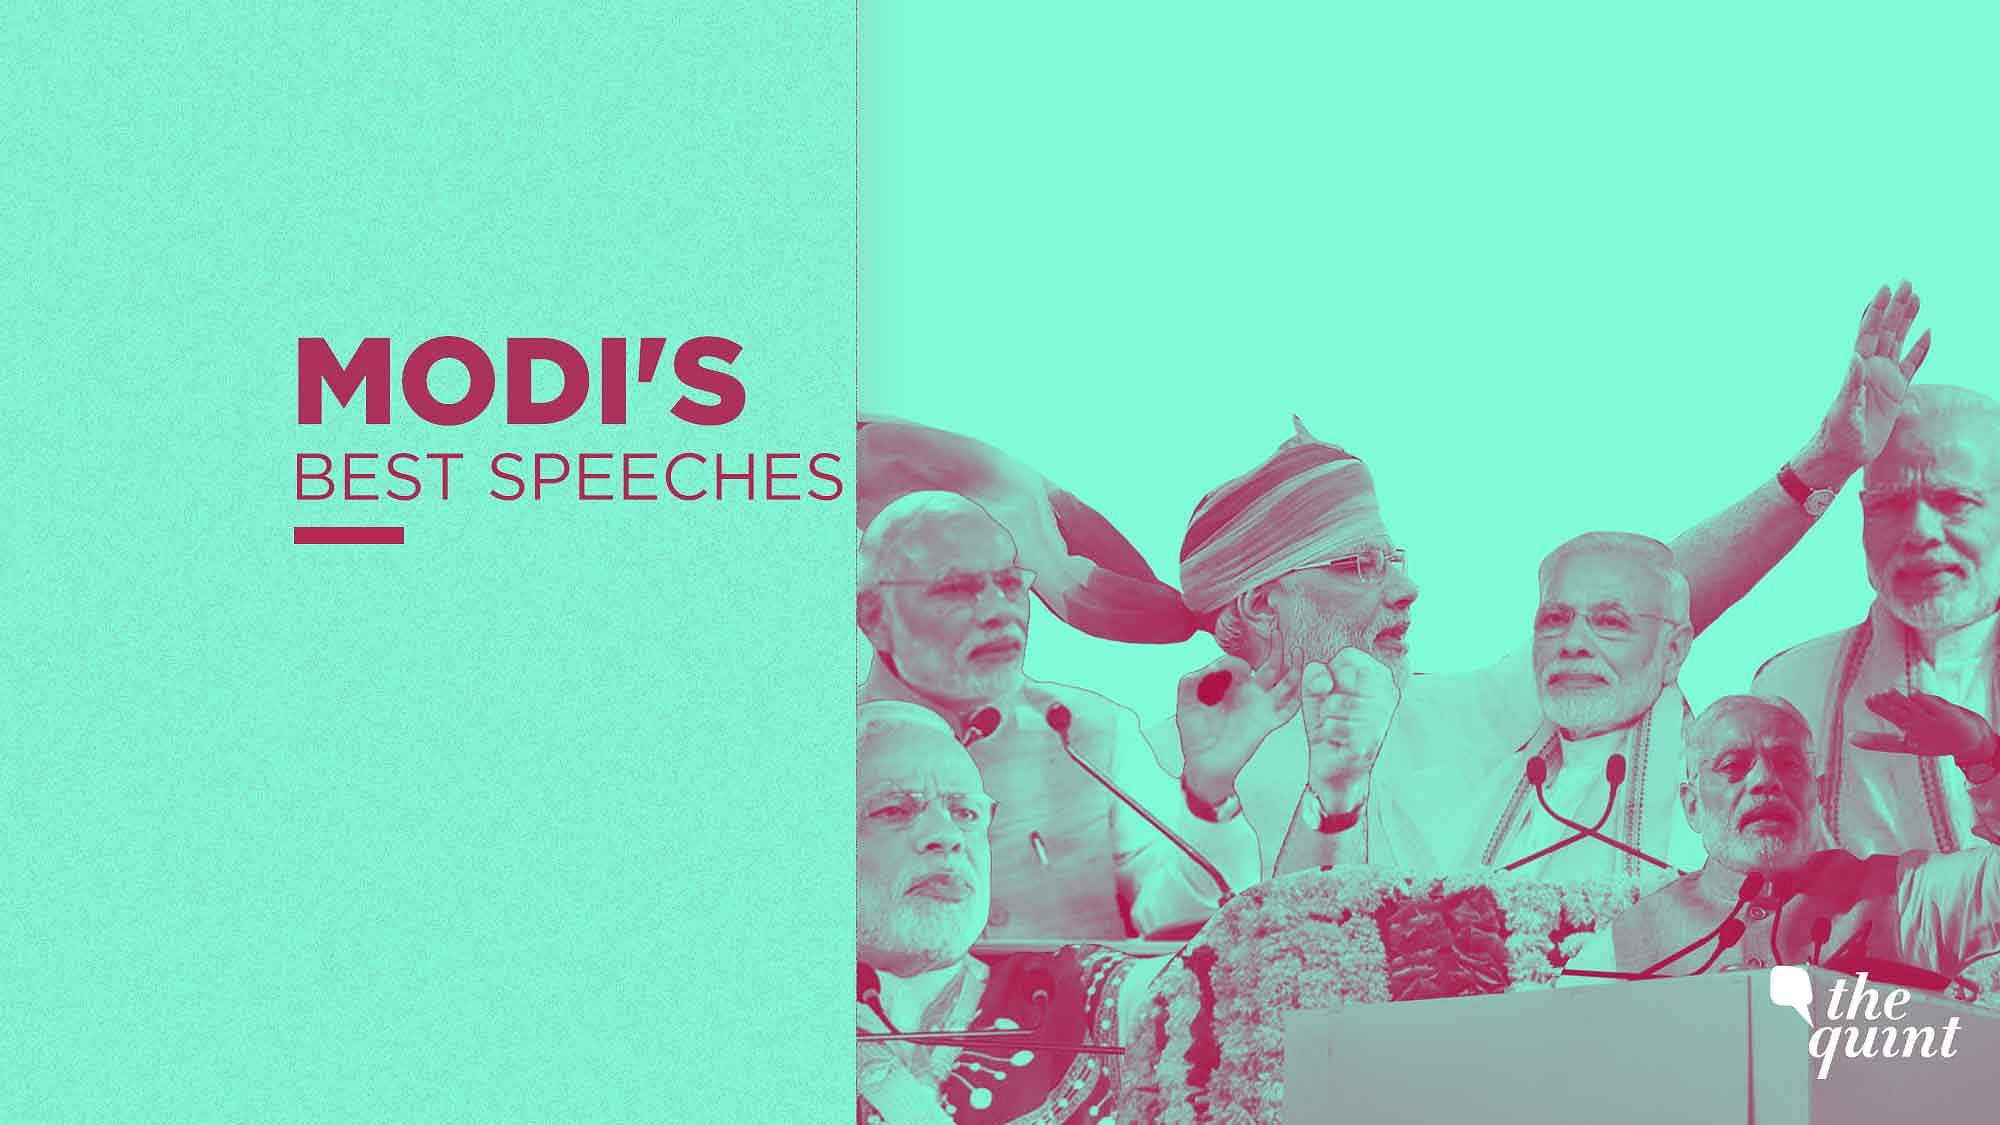 Throwback to PM Modi’s biggest speeches of 2018